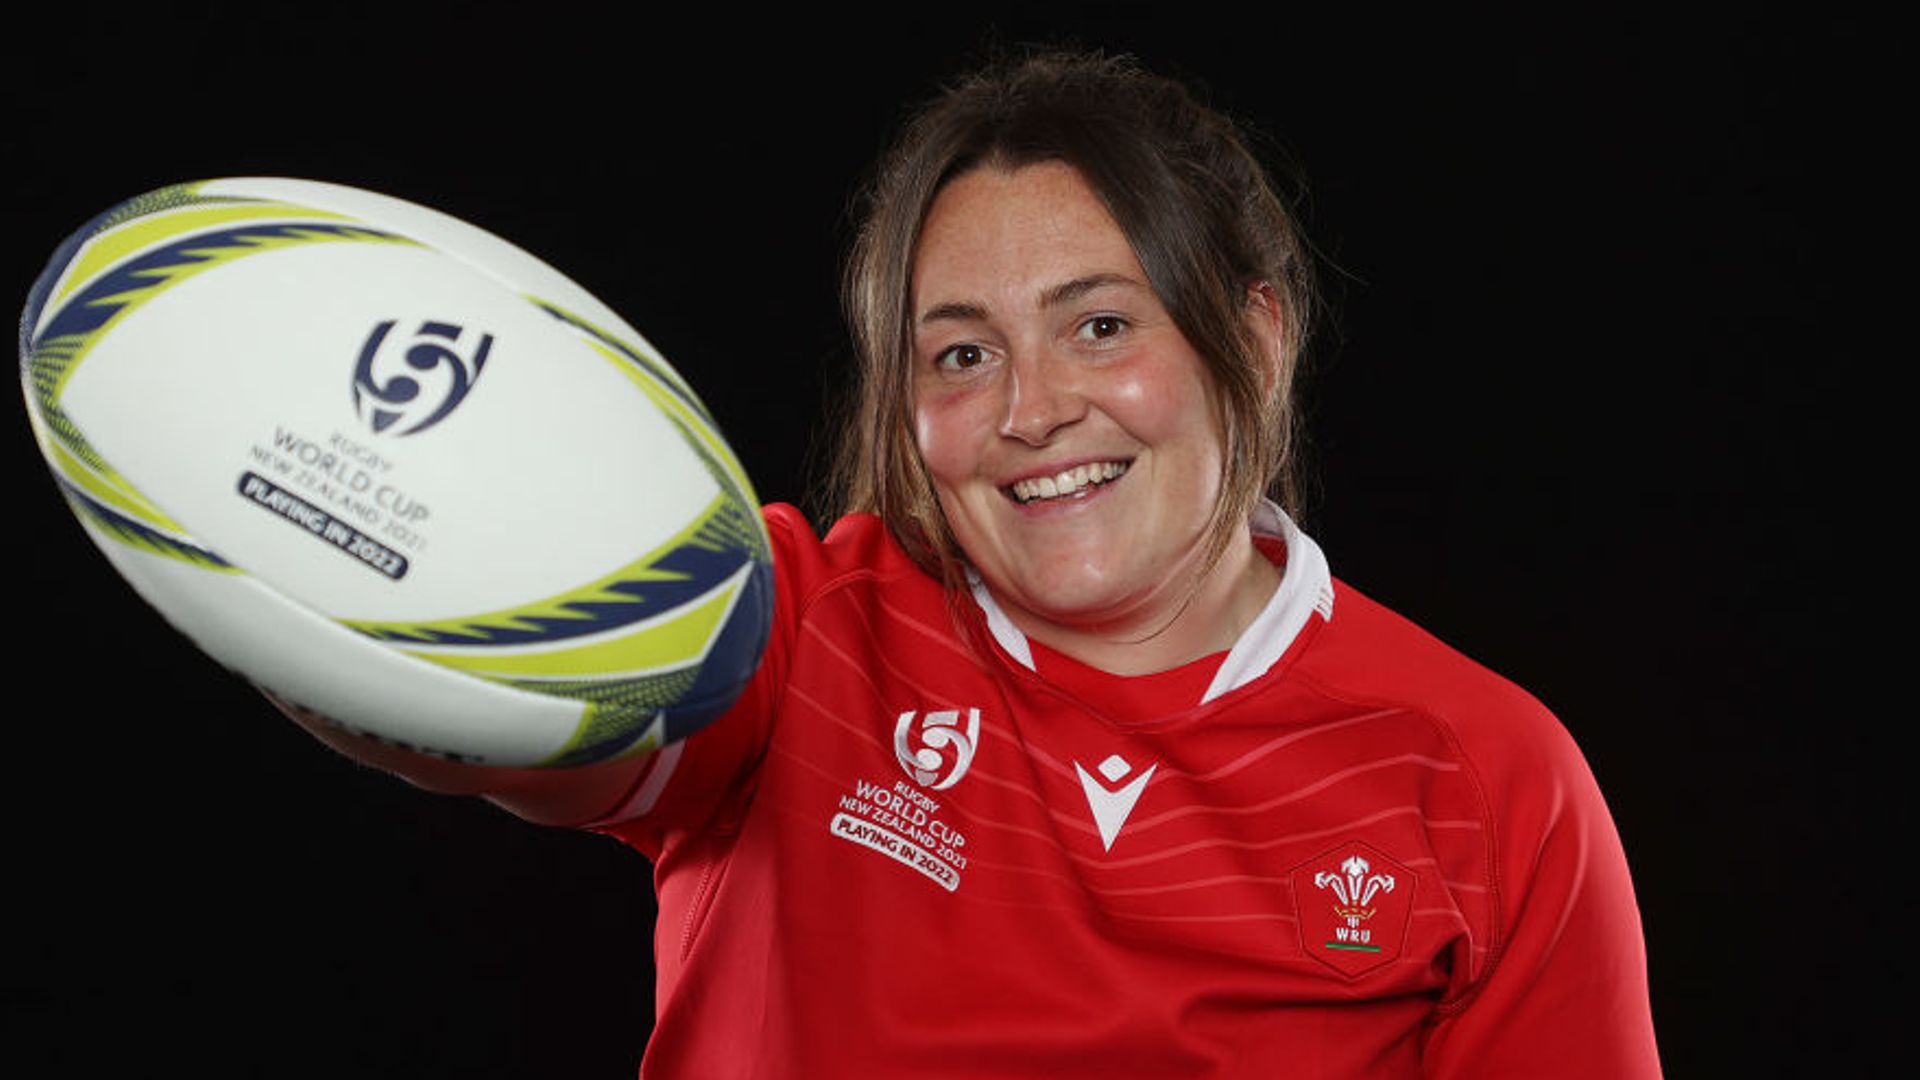 Meet the Wales prop swapping classroom to tackle World Cup dream